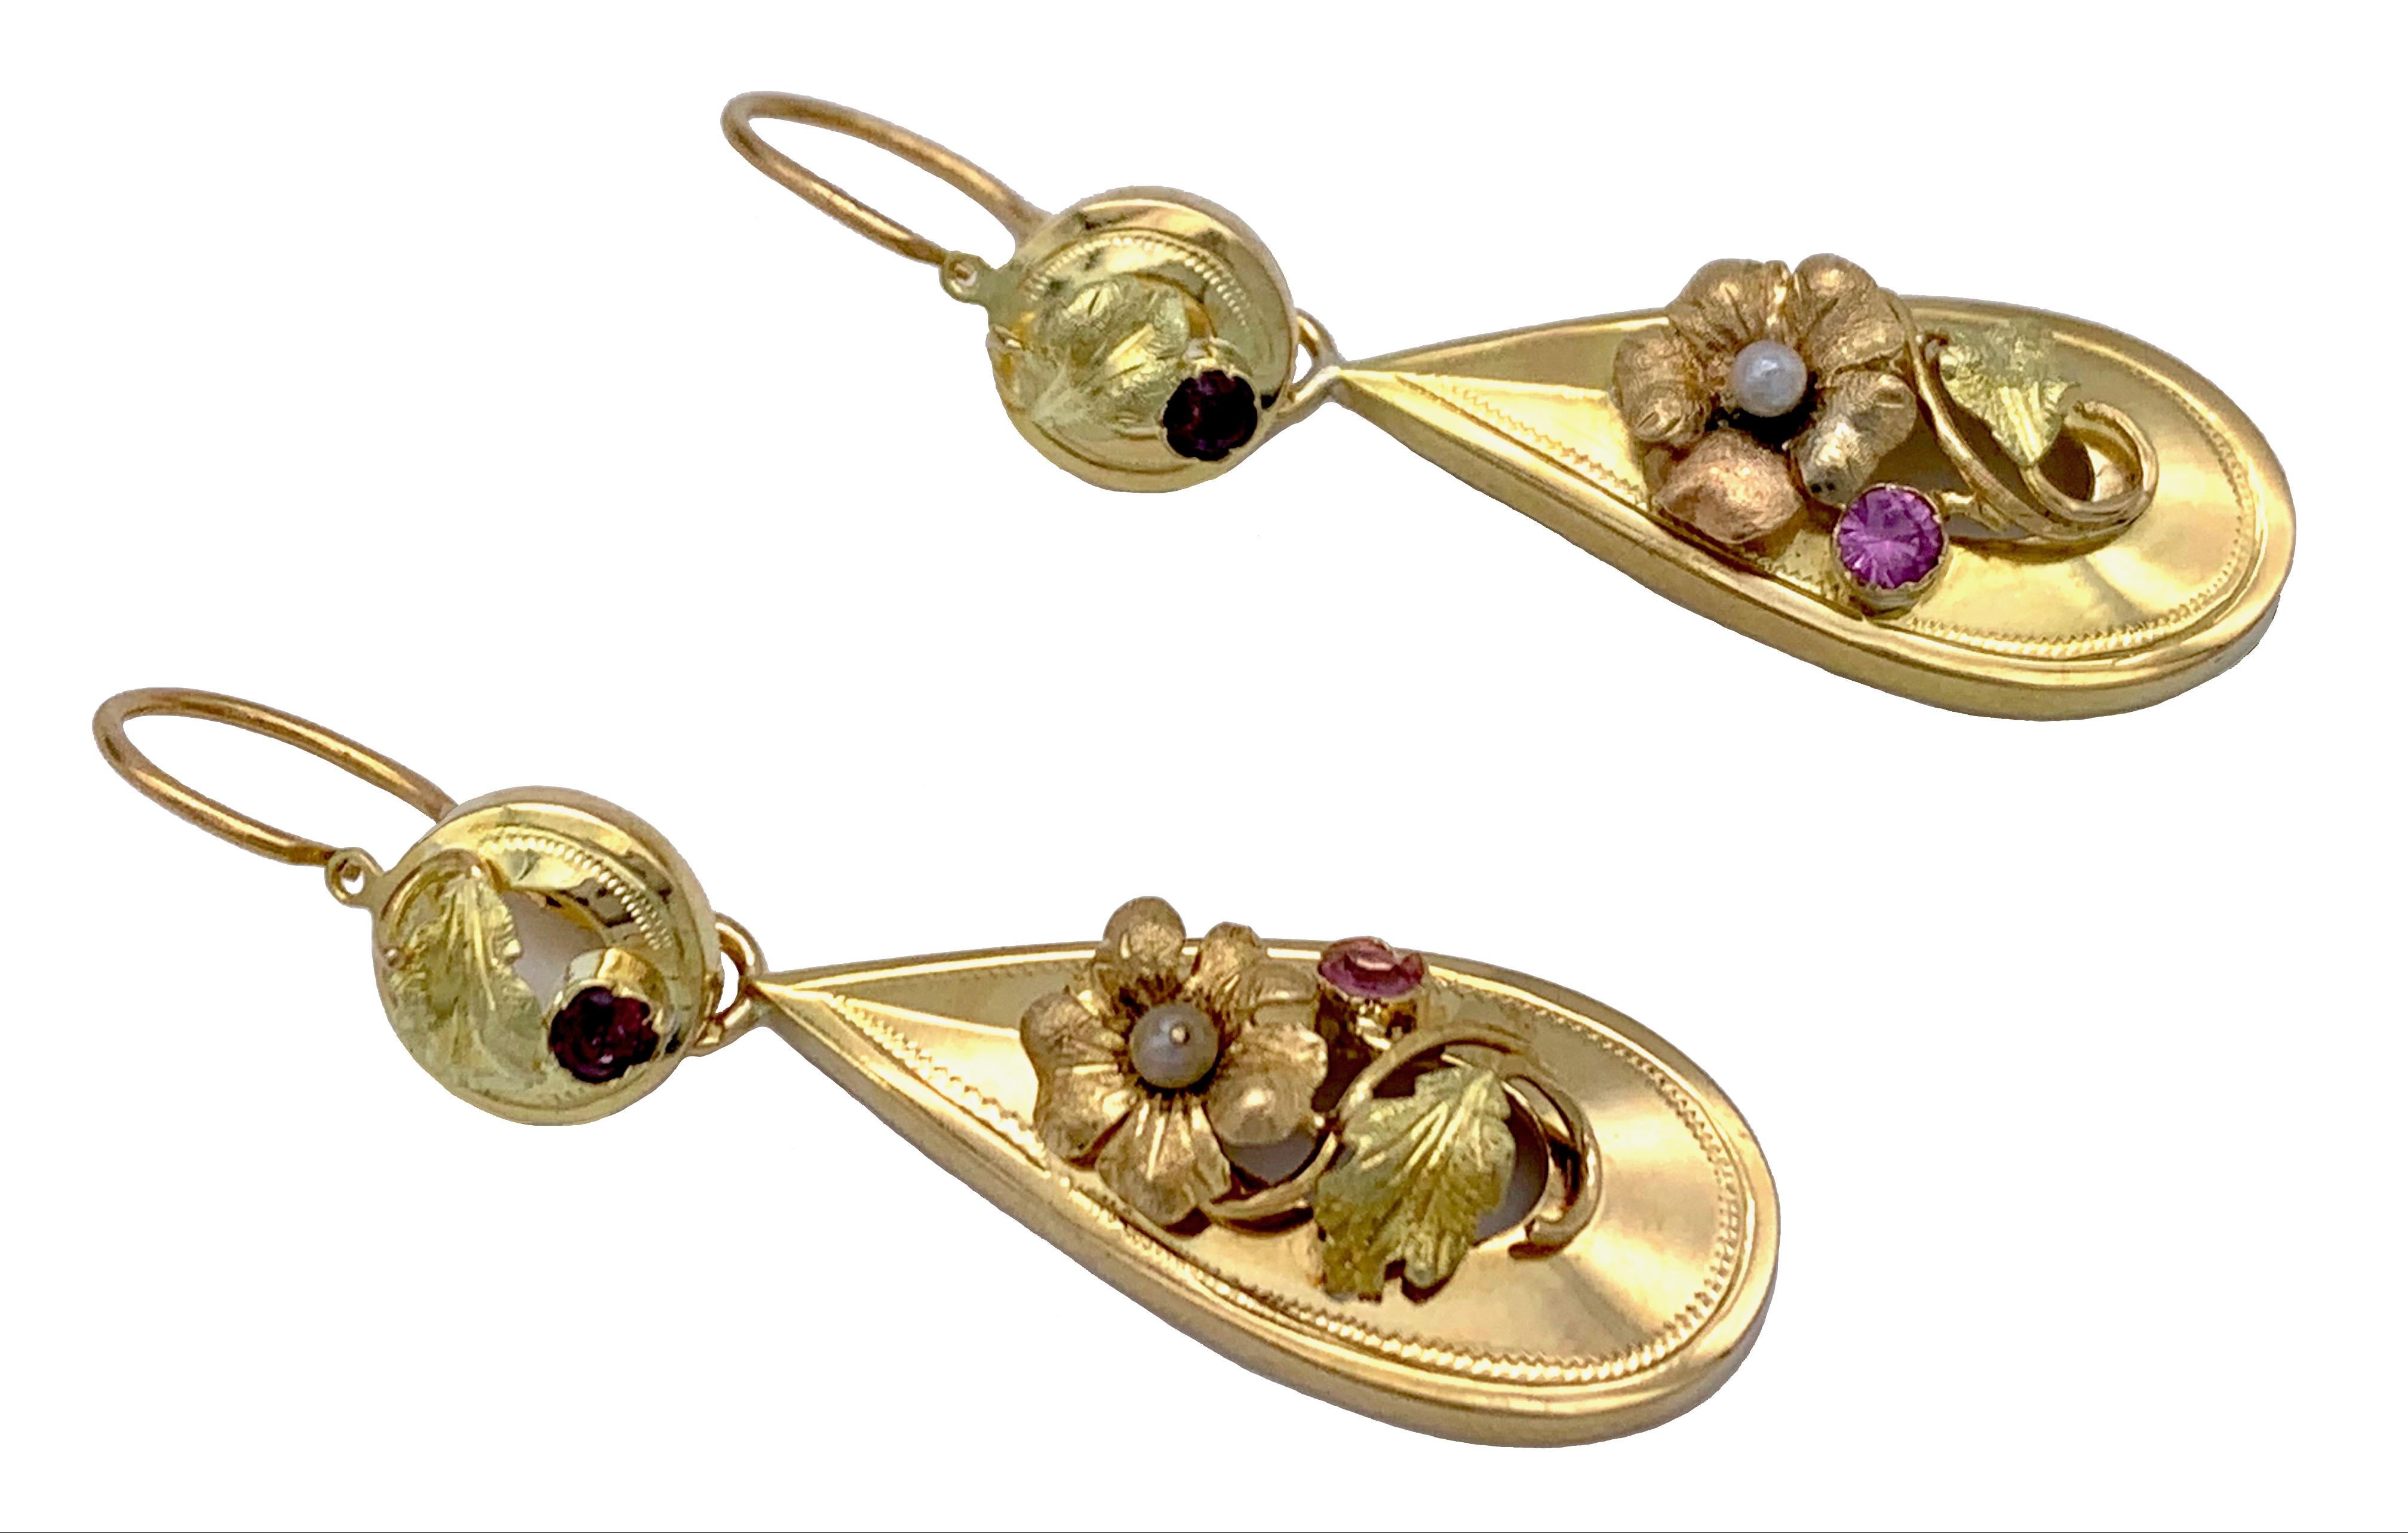 These earrings are called day and night earrings because the tops can be worn by them selves.
The earrings have been executed in three different gold hues and embellished with fine engraving. 